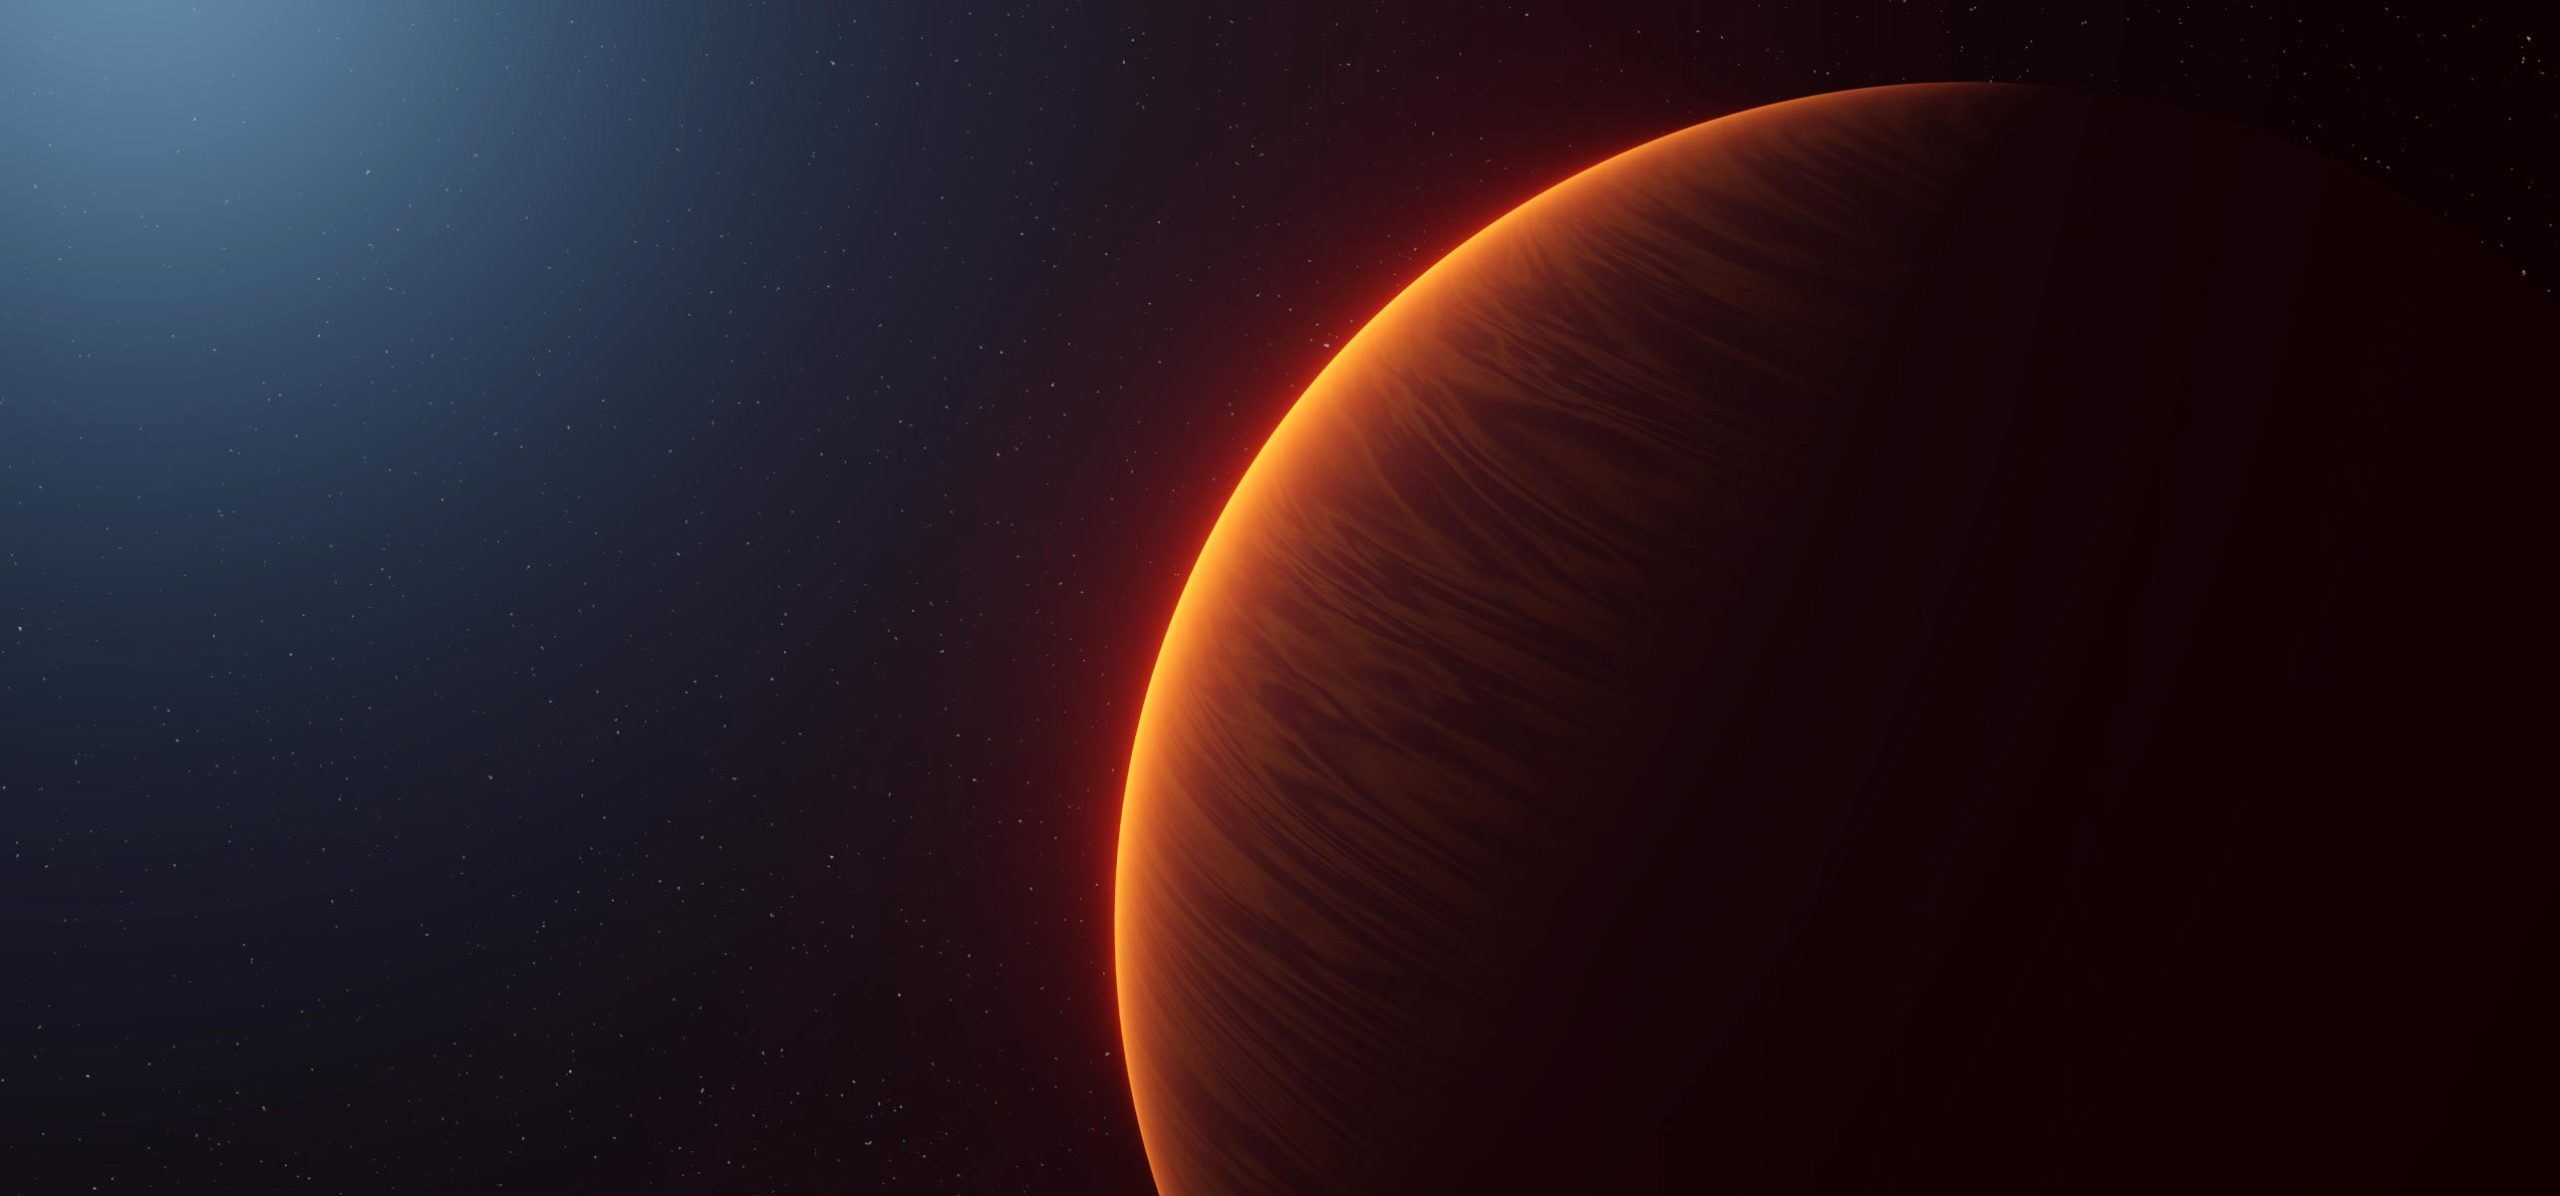 Artist's impression of ultra-hot Jupiter WASP-189b, which has titanium oxide in its atmosphere. Credit: Bibiana Prinoth